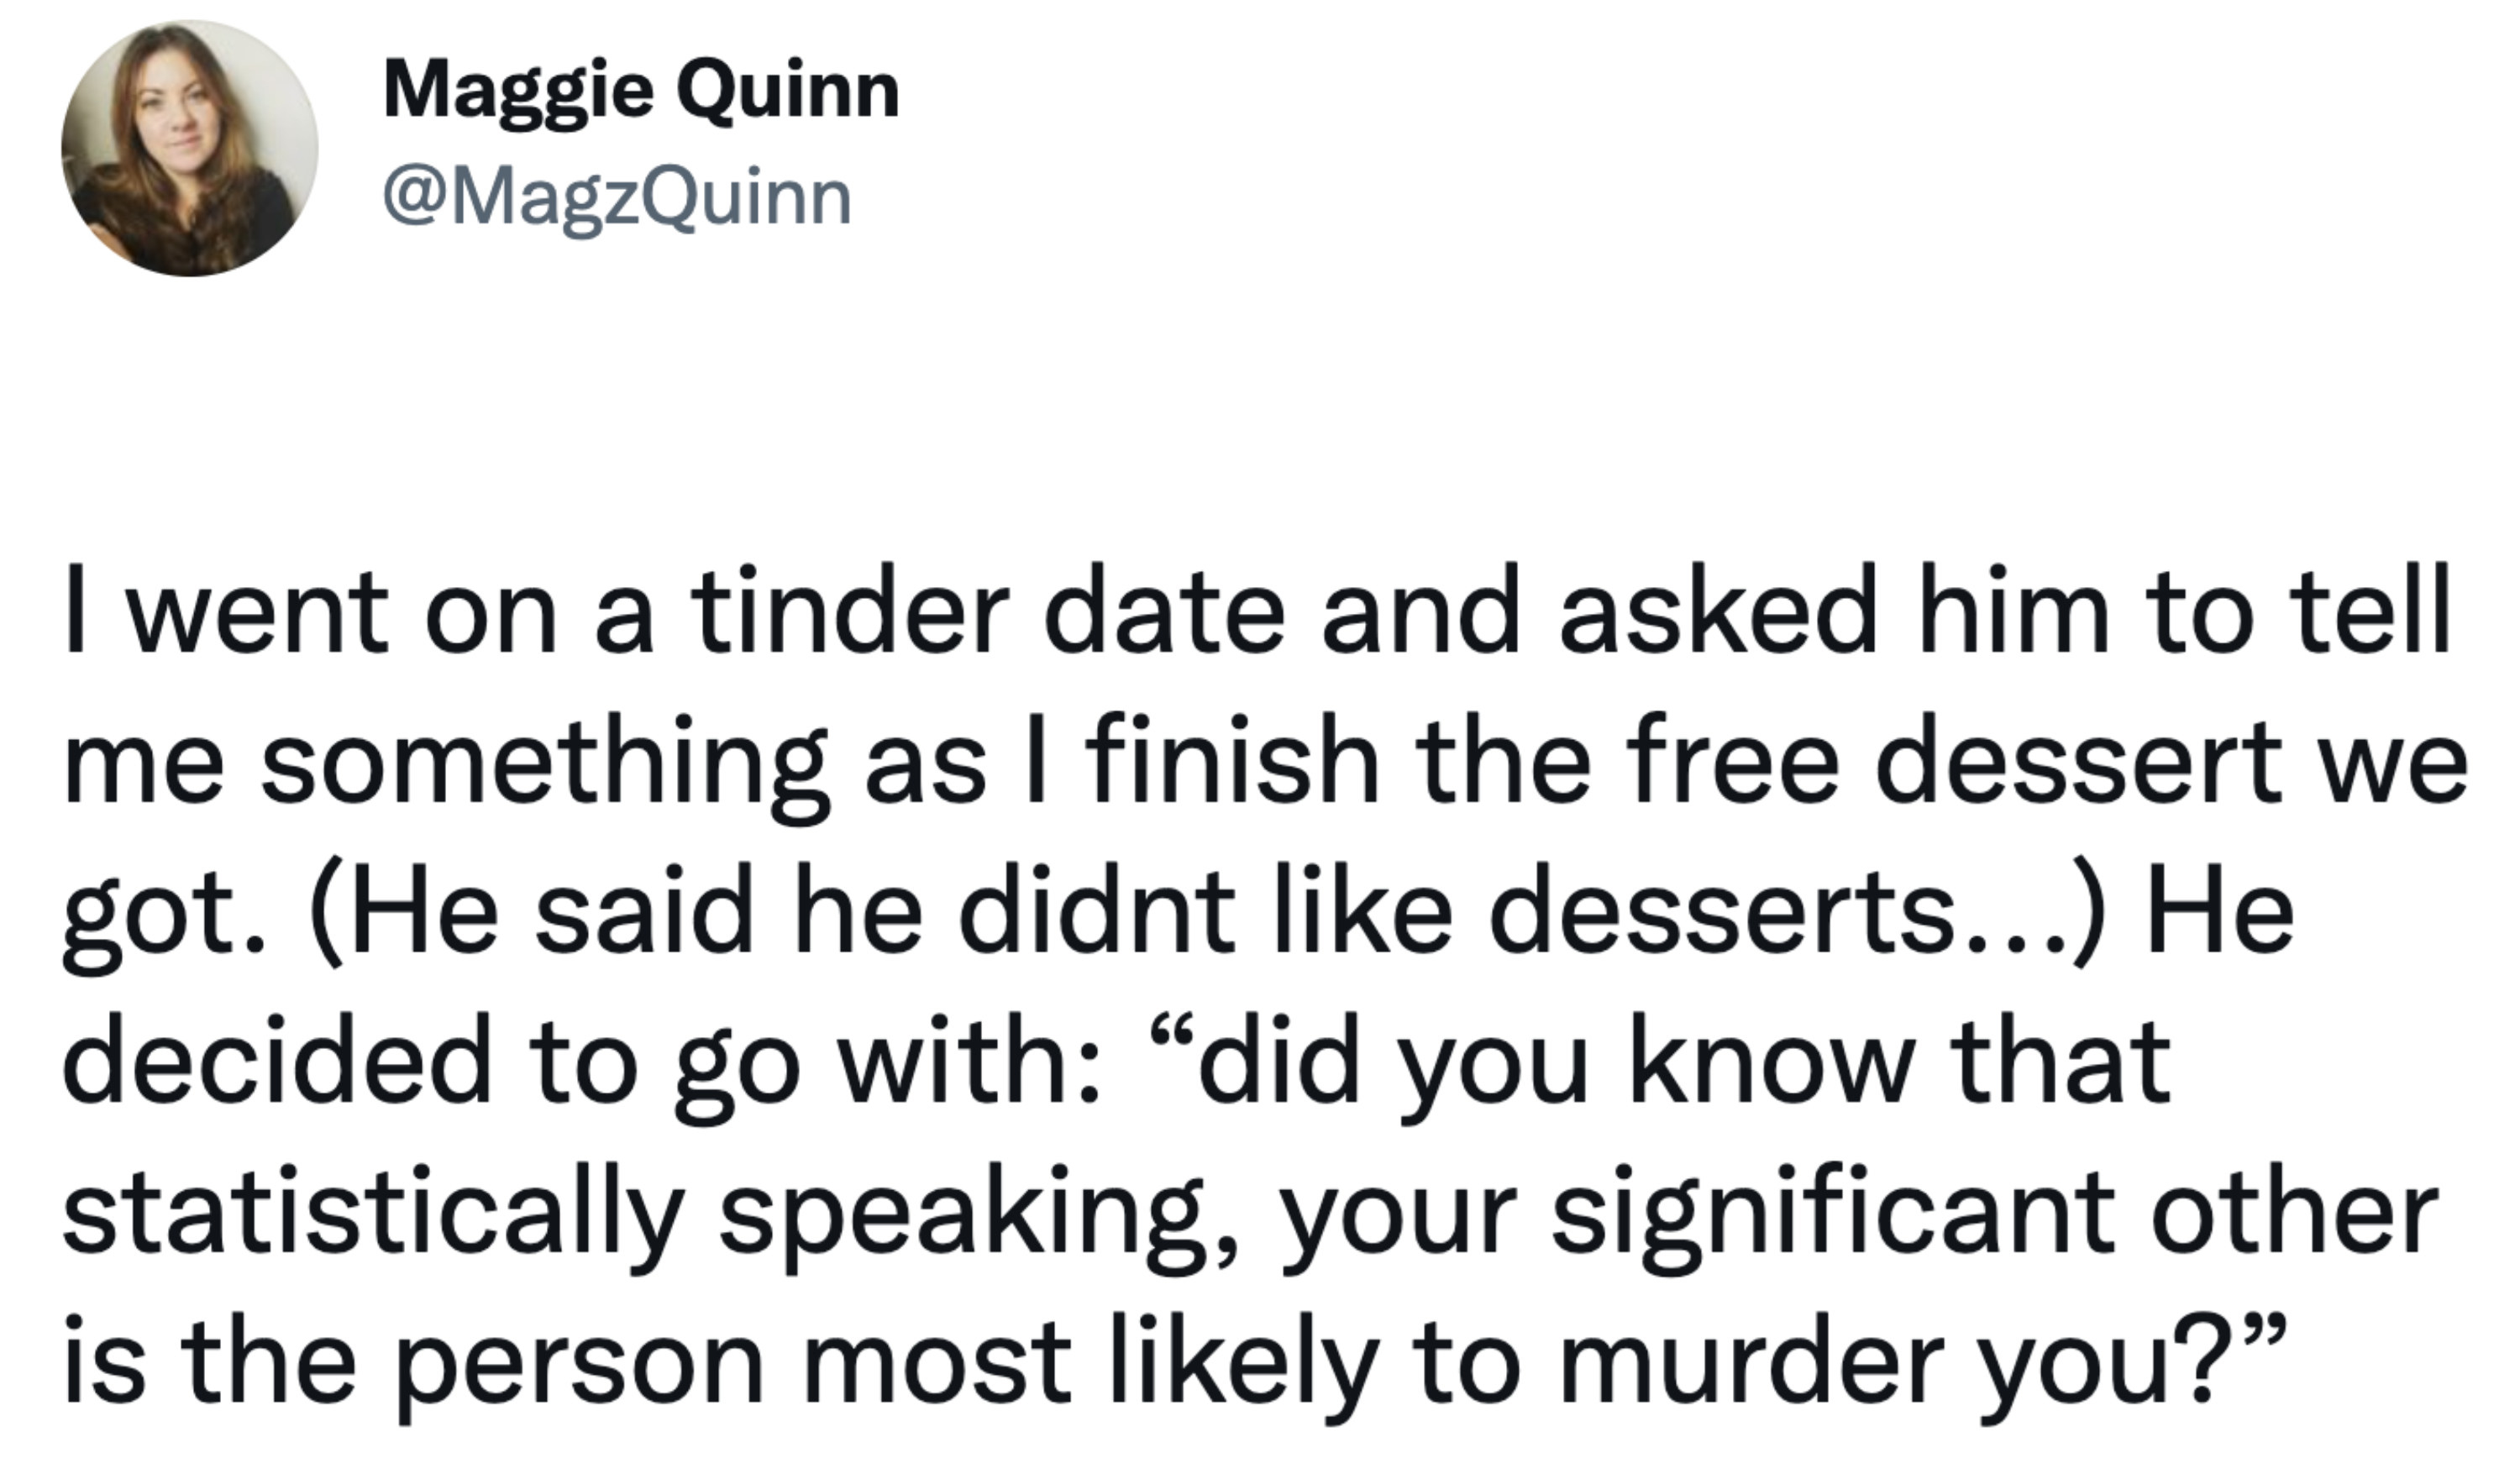 Date where someone brings up a macabre awkward fact about how your significant other is most likely to murder you